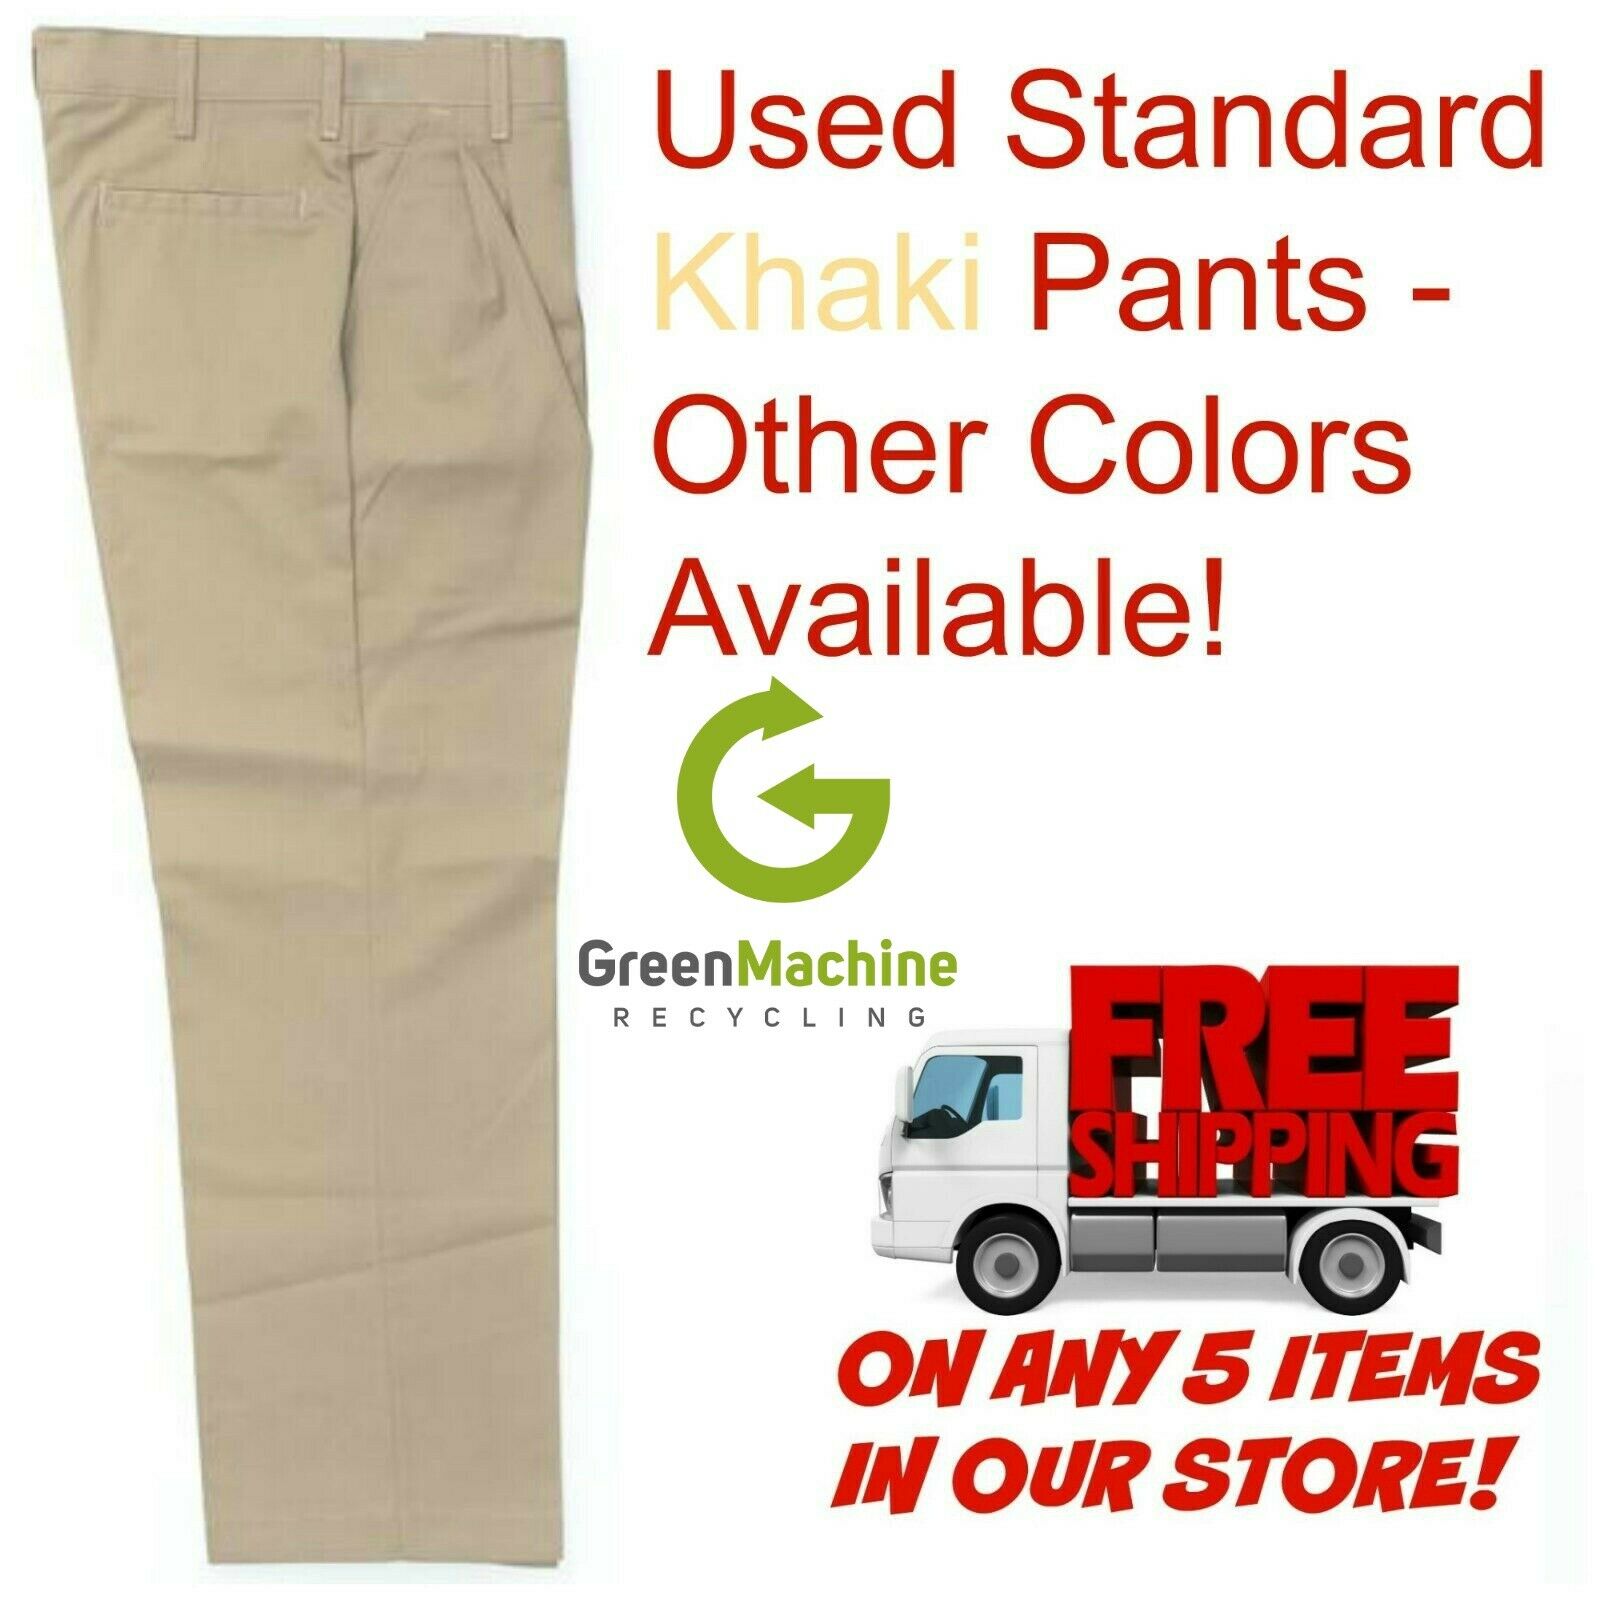 Used Uniform Work Pants Cintas Redkap Unifirst G&k Dickies And Others